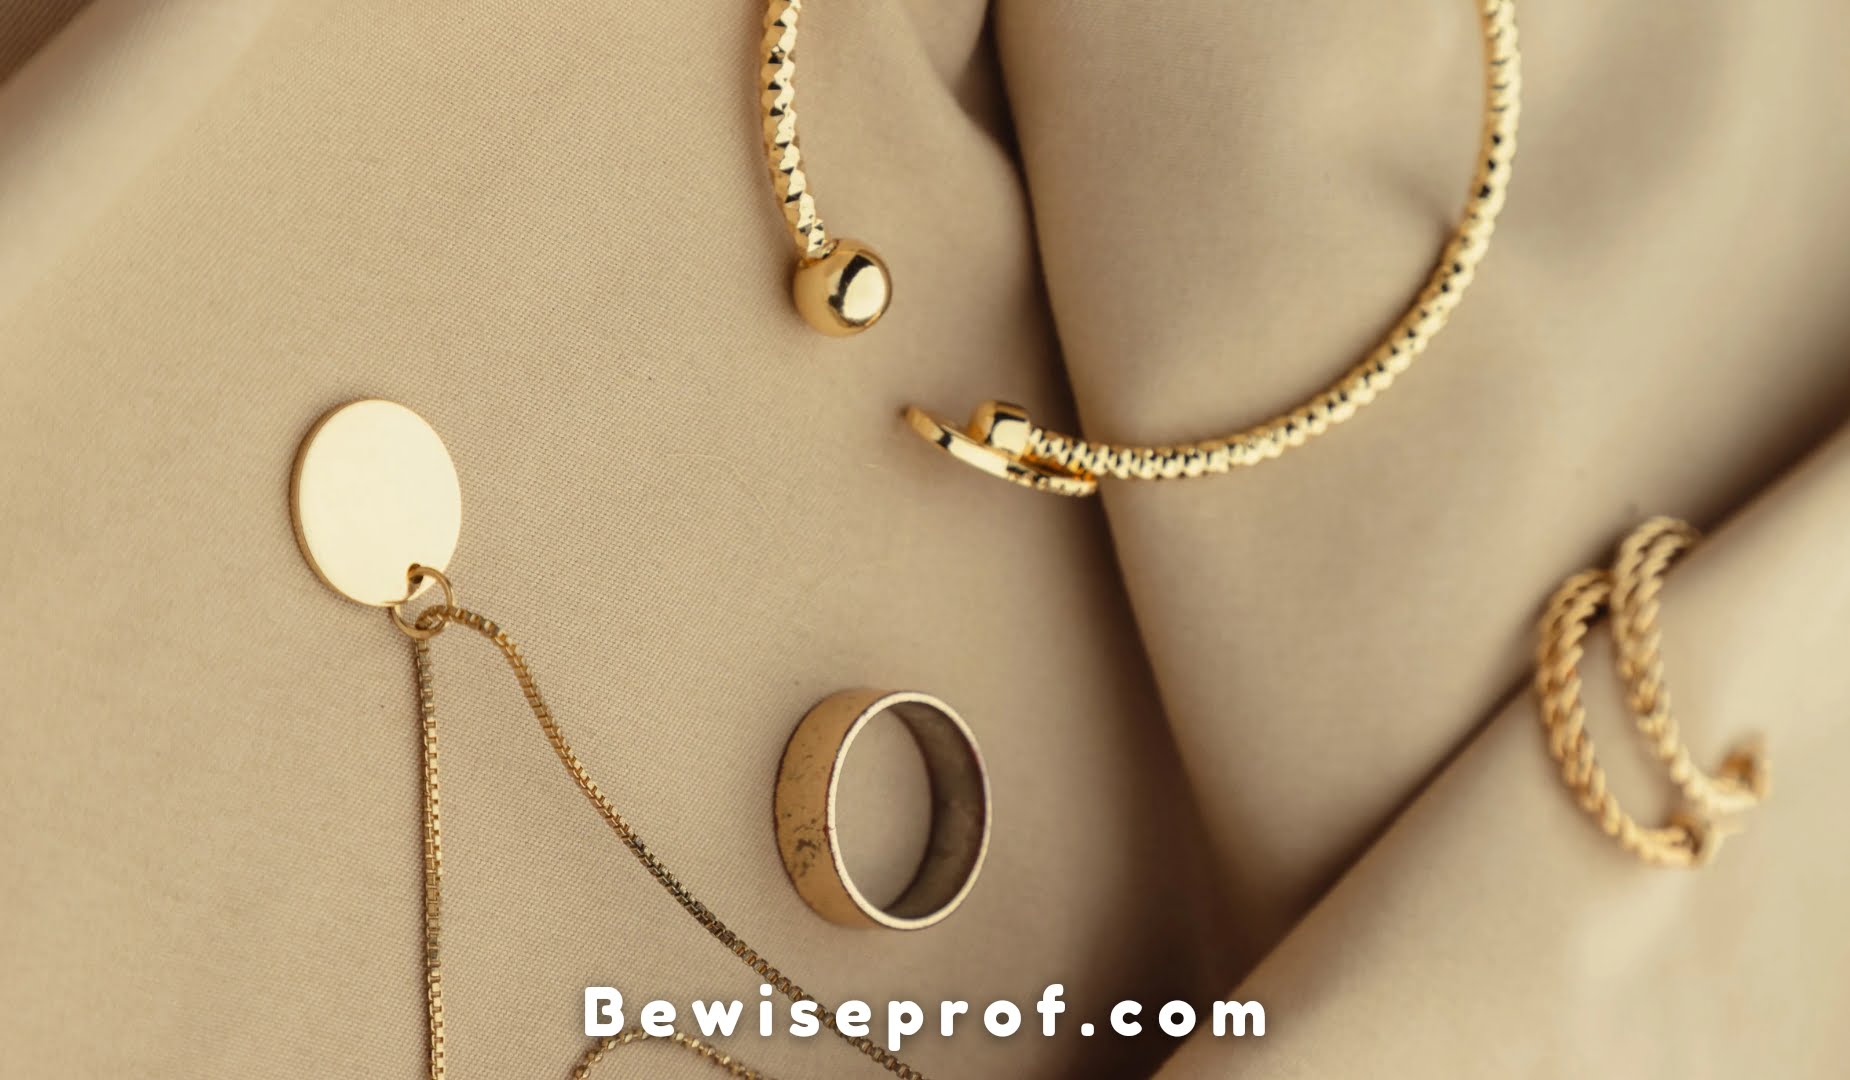 18k Gold Earrings That Are Perfect For Office Wear